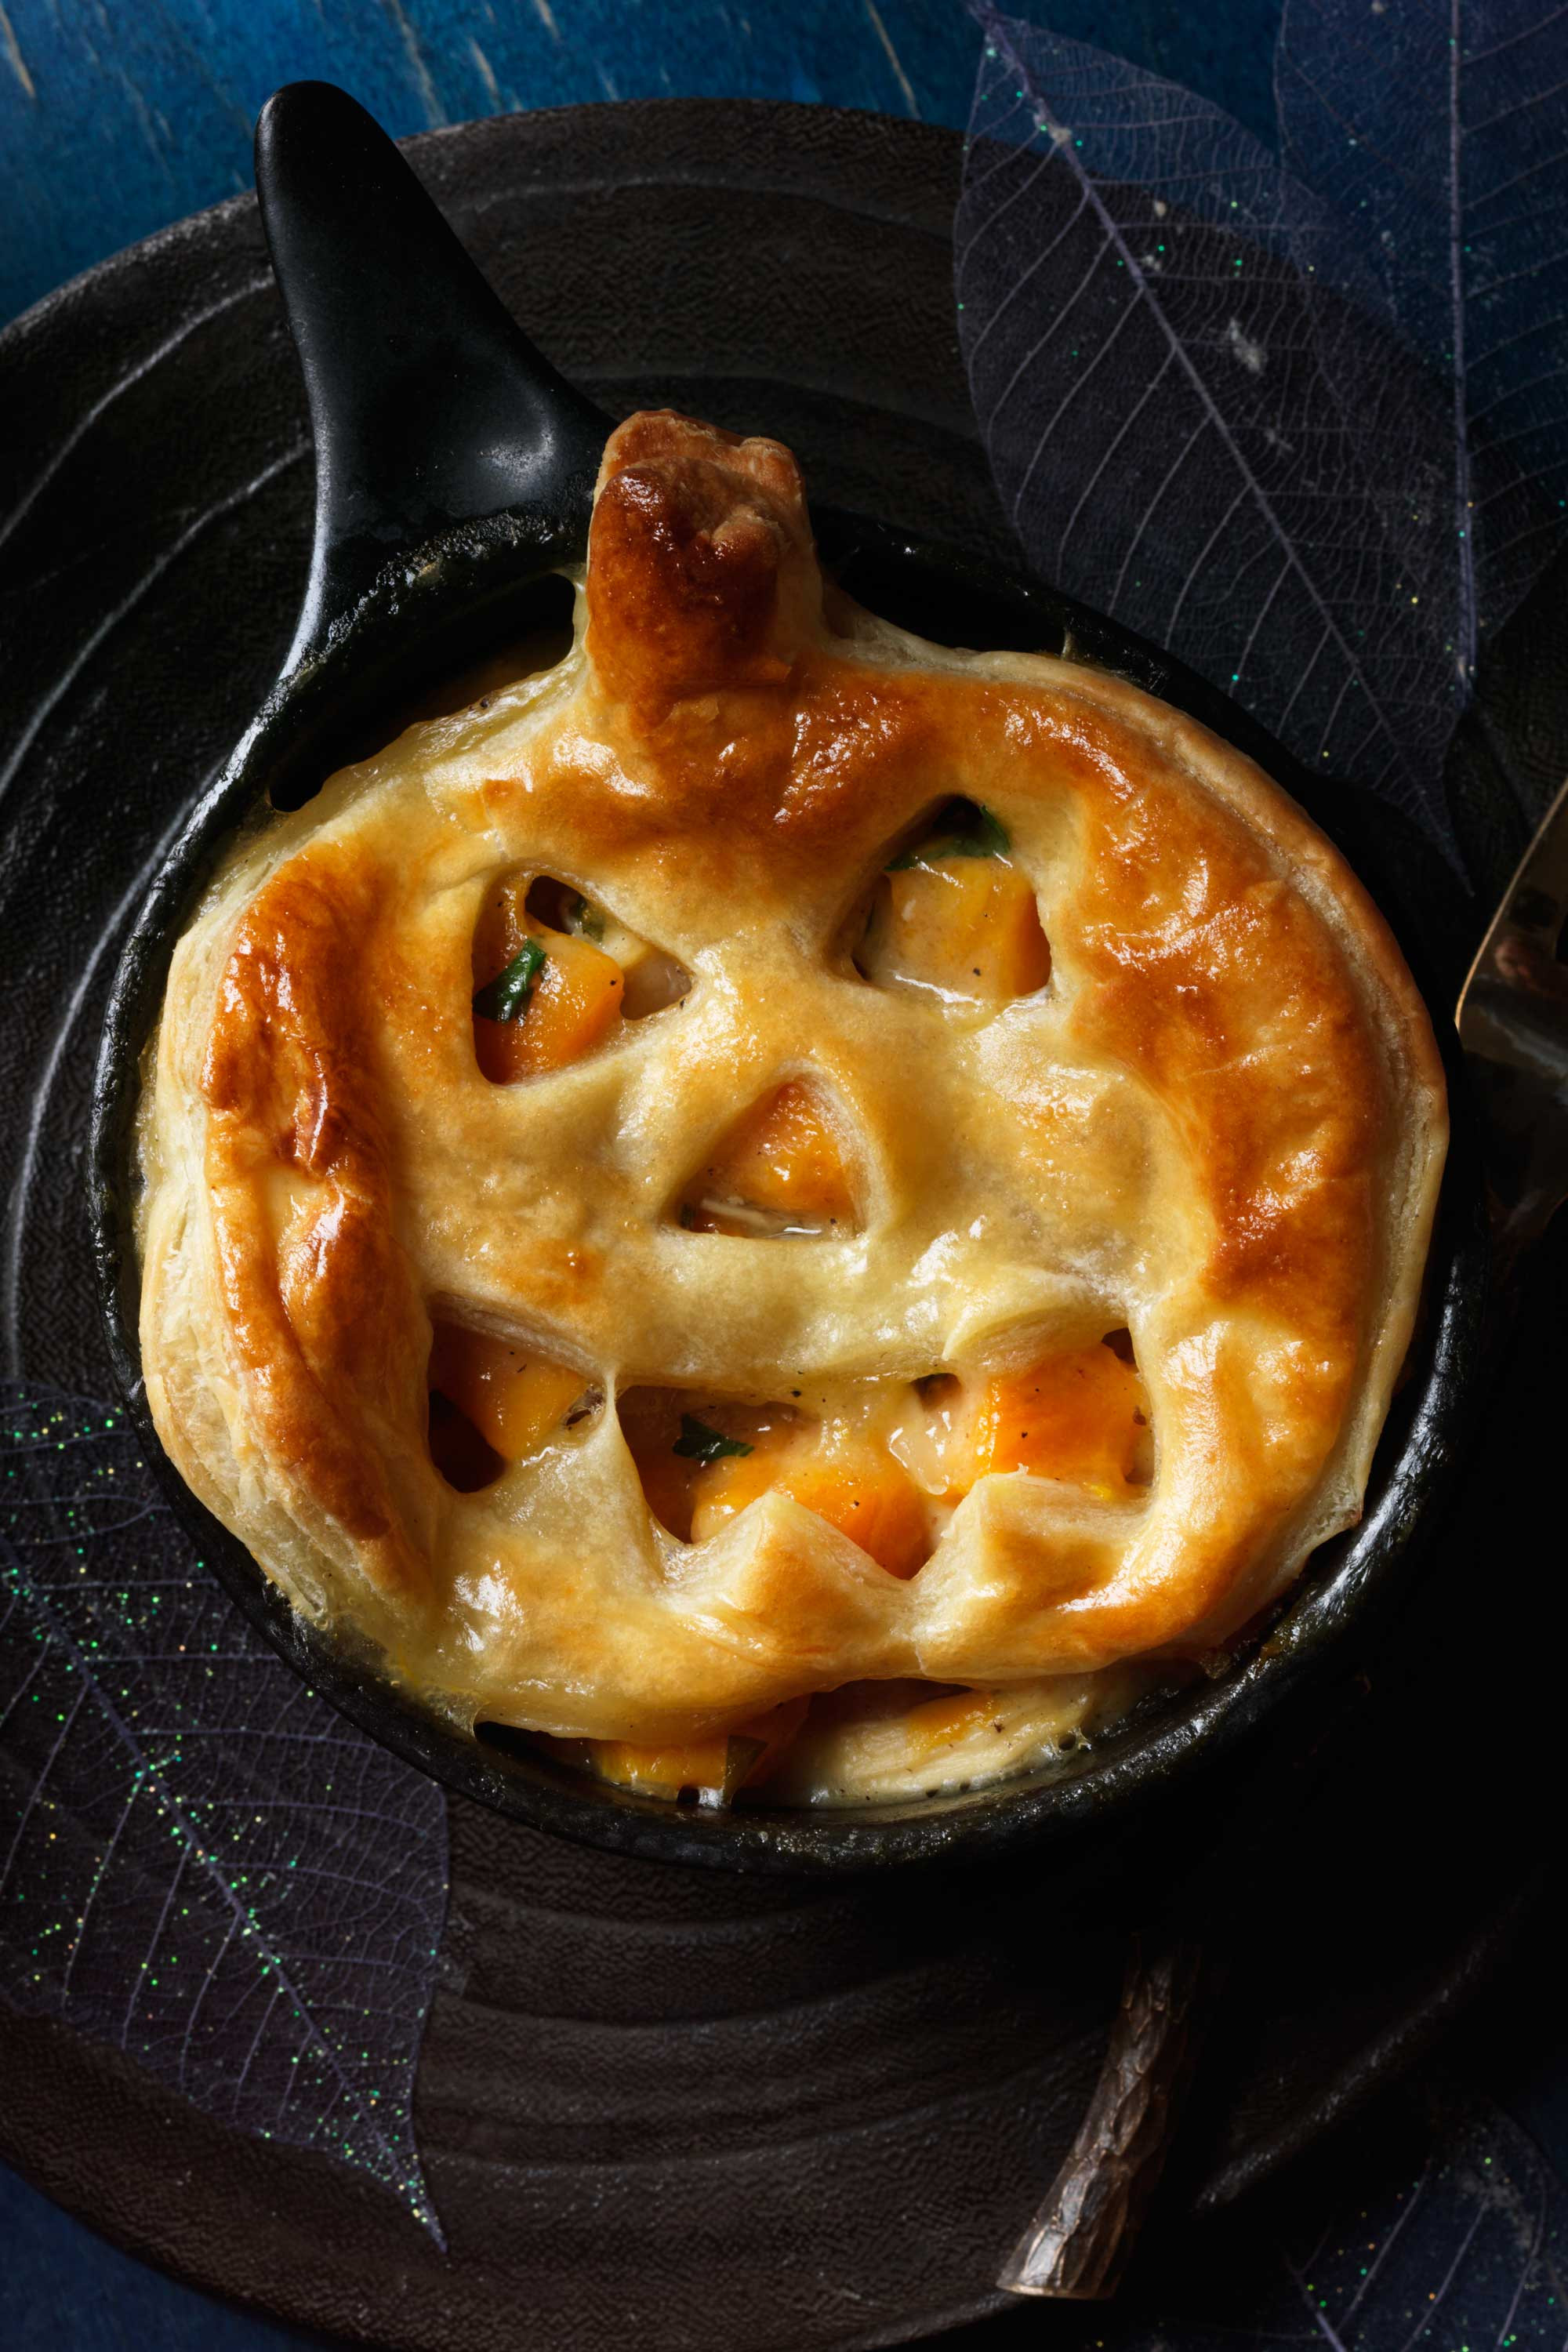 Spooky Halloween Dinners
 20 Spooky Halloween Dinner Ideas Best Recipes for